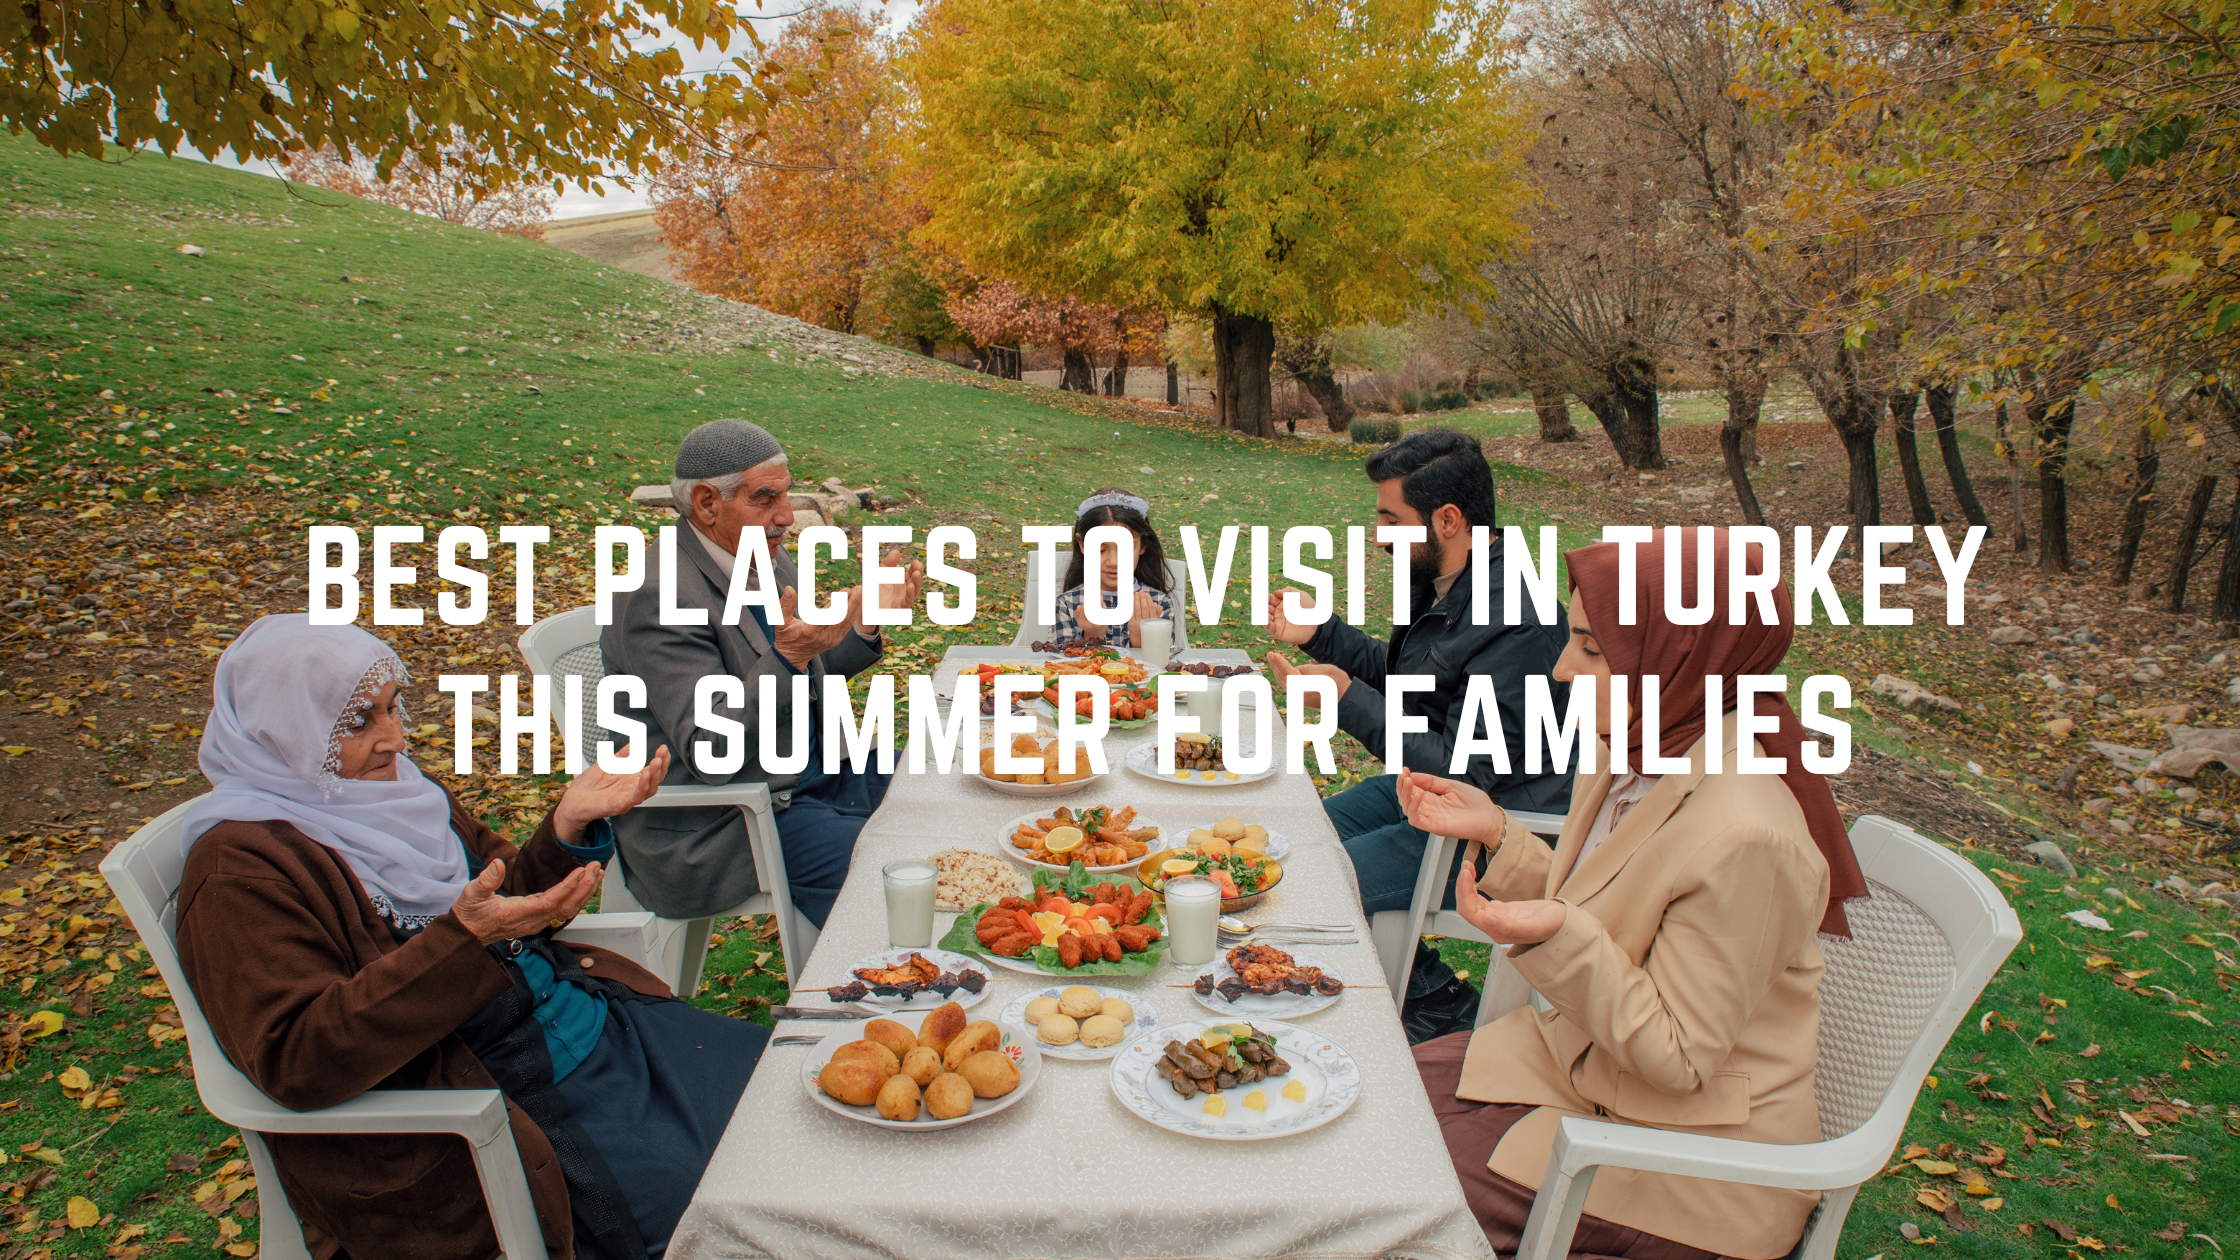 The Best Places To Visit In Turkey This Summer For Families